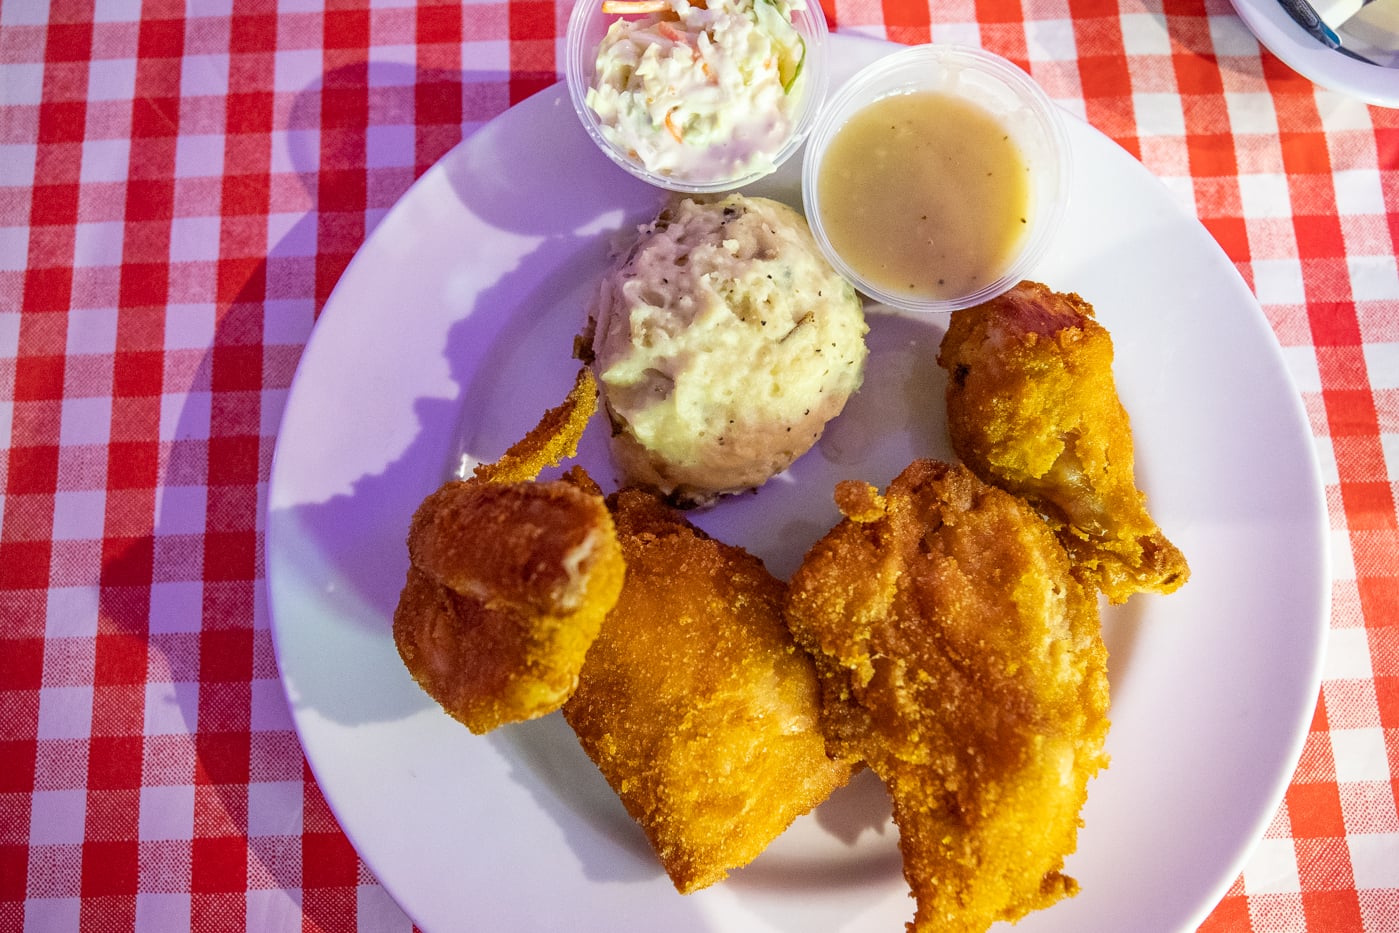 Fried chicken dinner at Dell Rhea's Chicken Basket a Route 66 restaurant in Illinois.